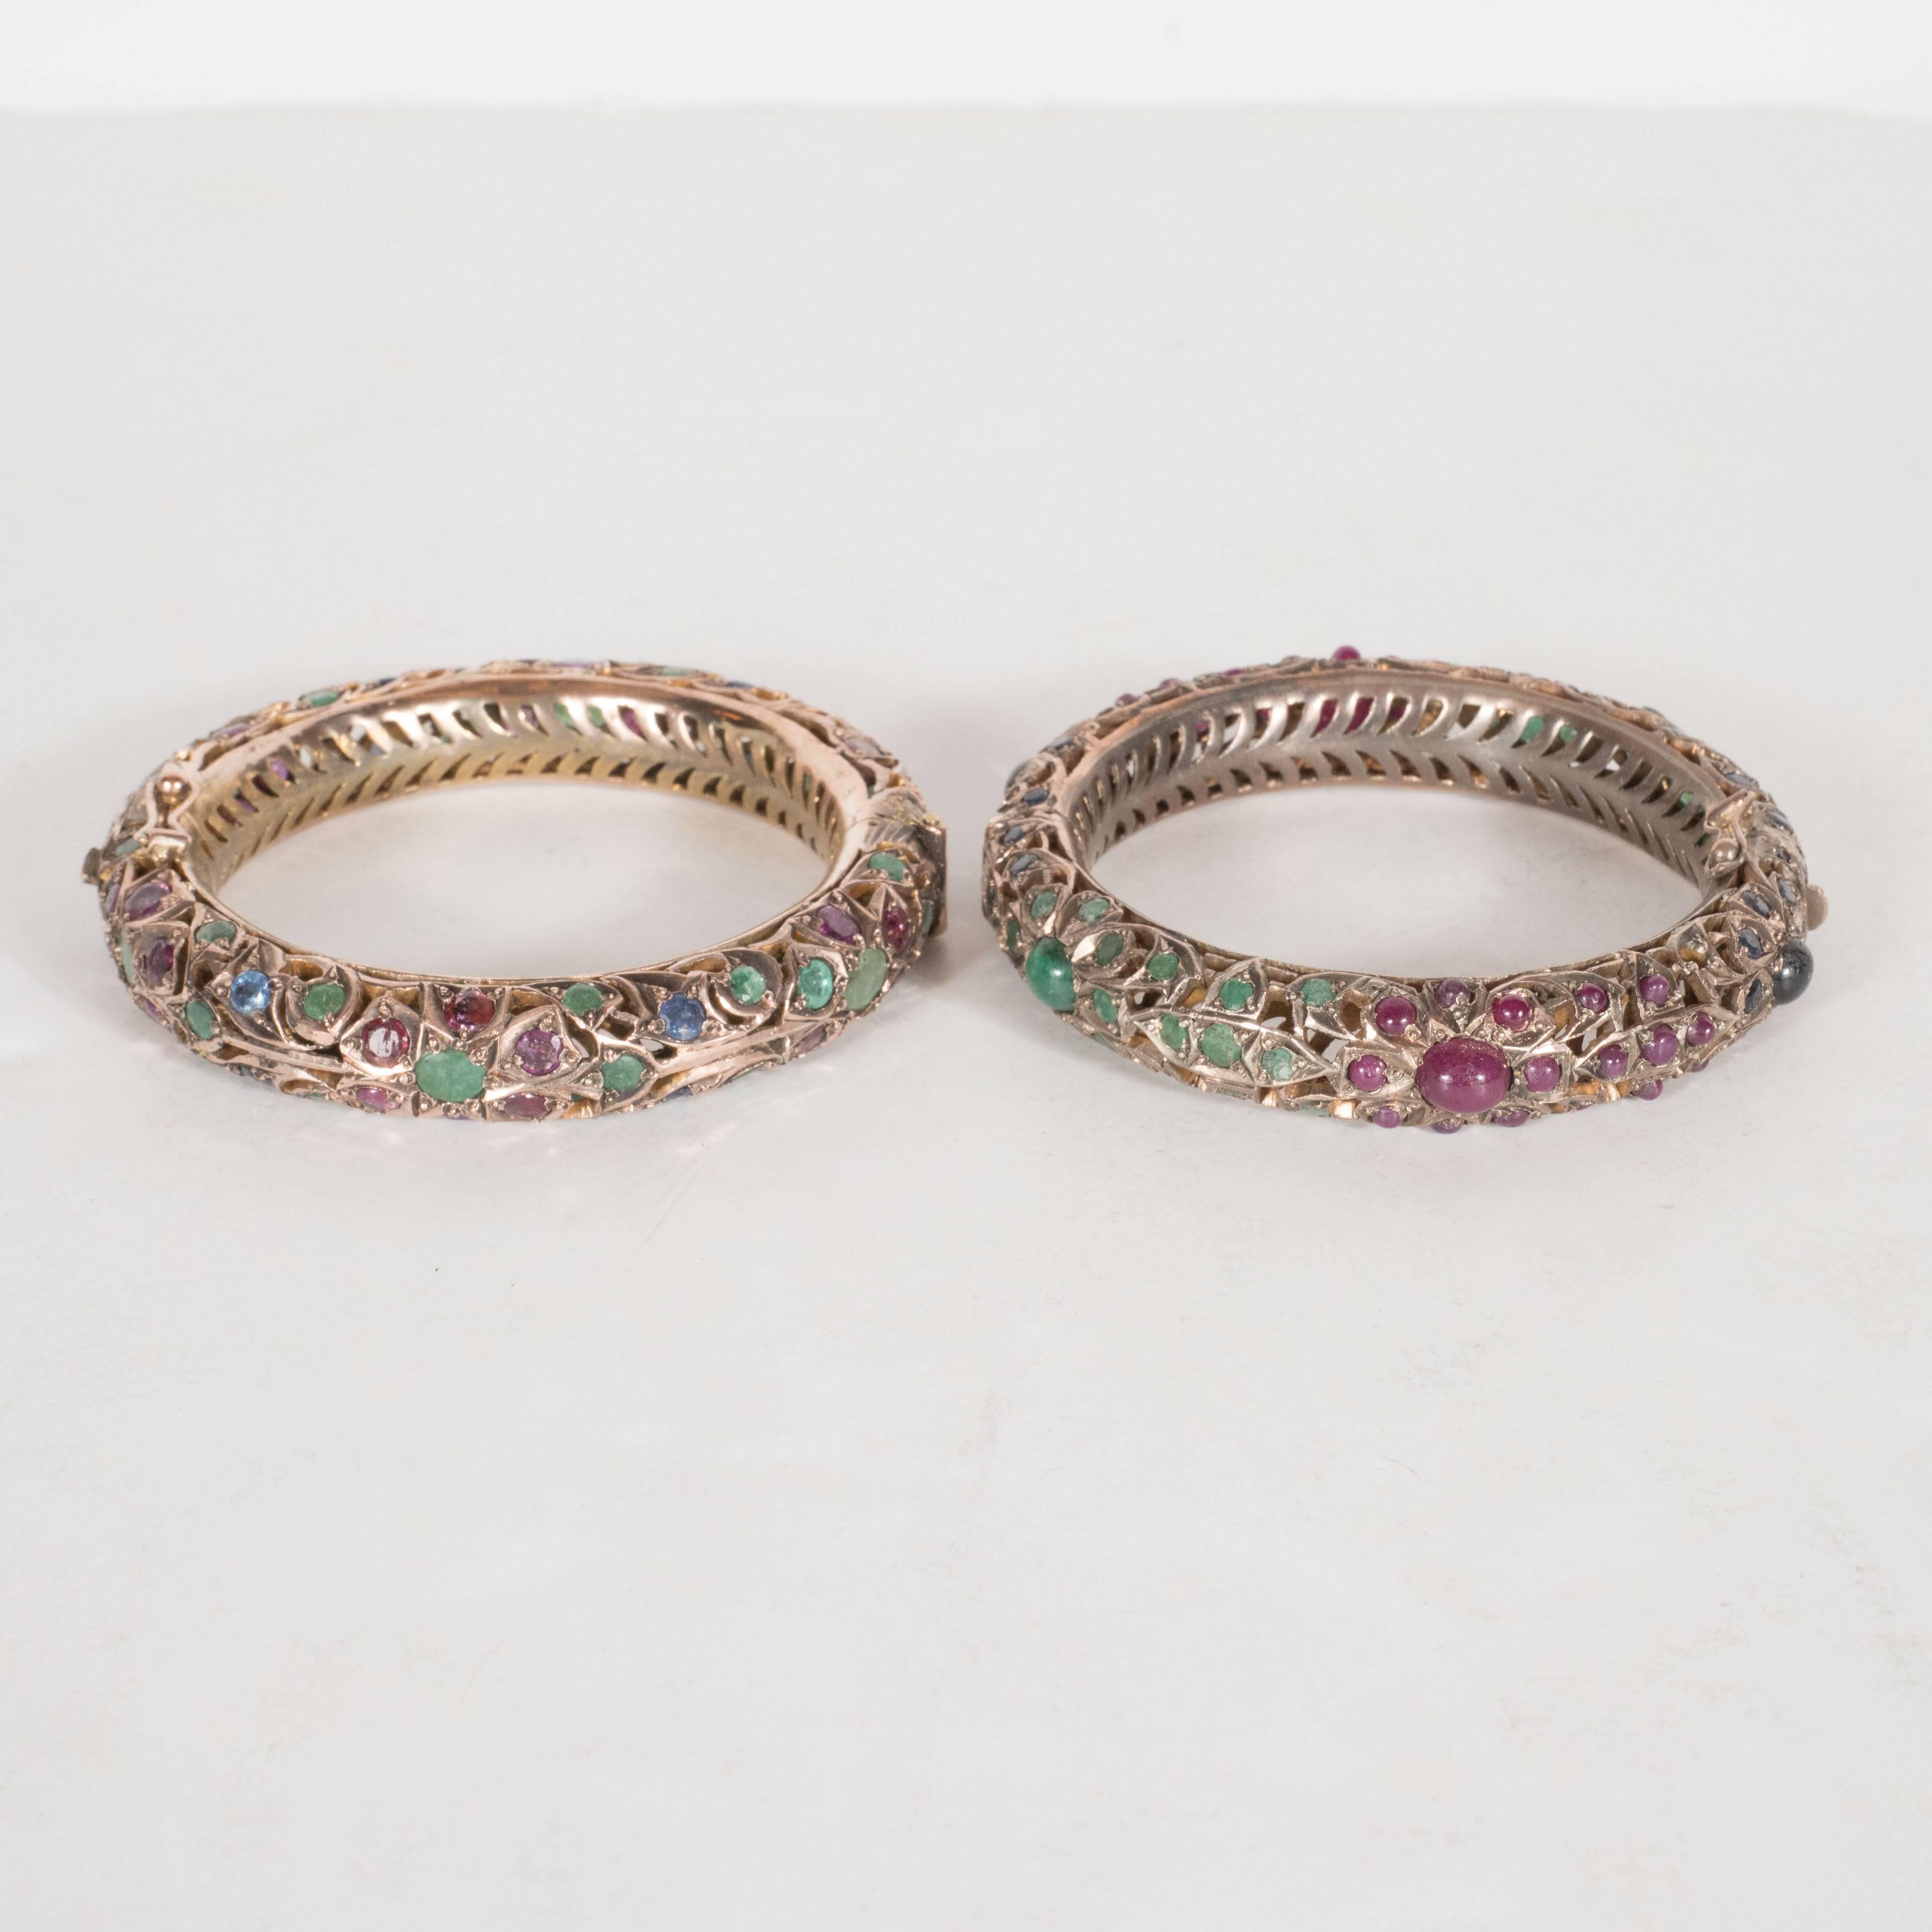 This Exquisite pair of bangle bracelets features round cut sapphires, rubies and emeralds set in 12 karat white gold. It exhibits Moorish geometric designs throughout. The inside is perforated with horizontally configured half crescents. It includes